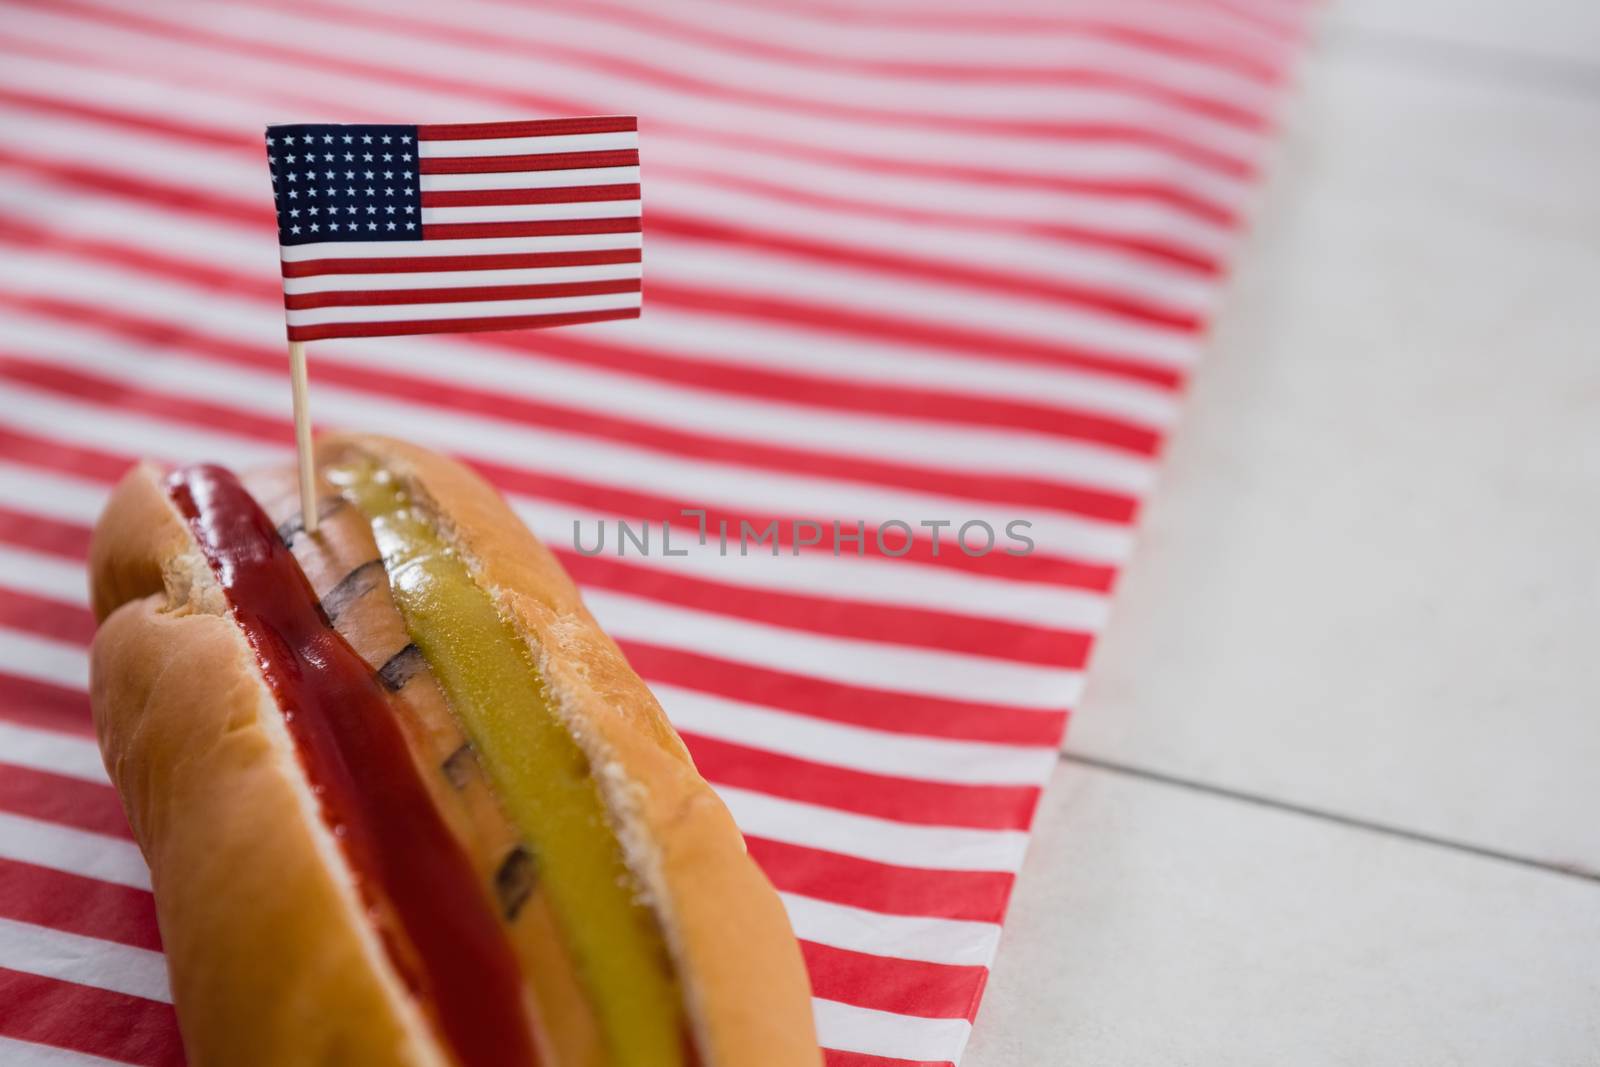 Close-up of Hot dog on wooden table with 4th july theme